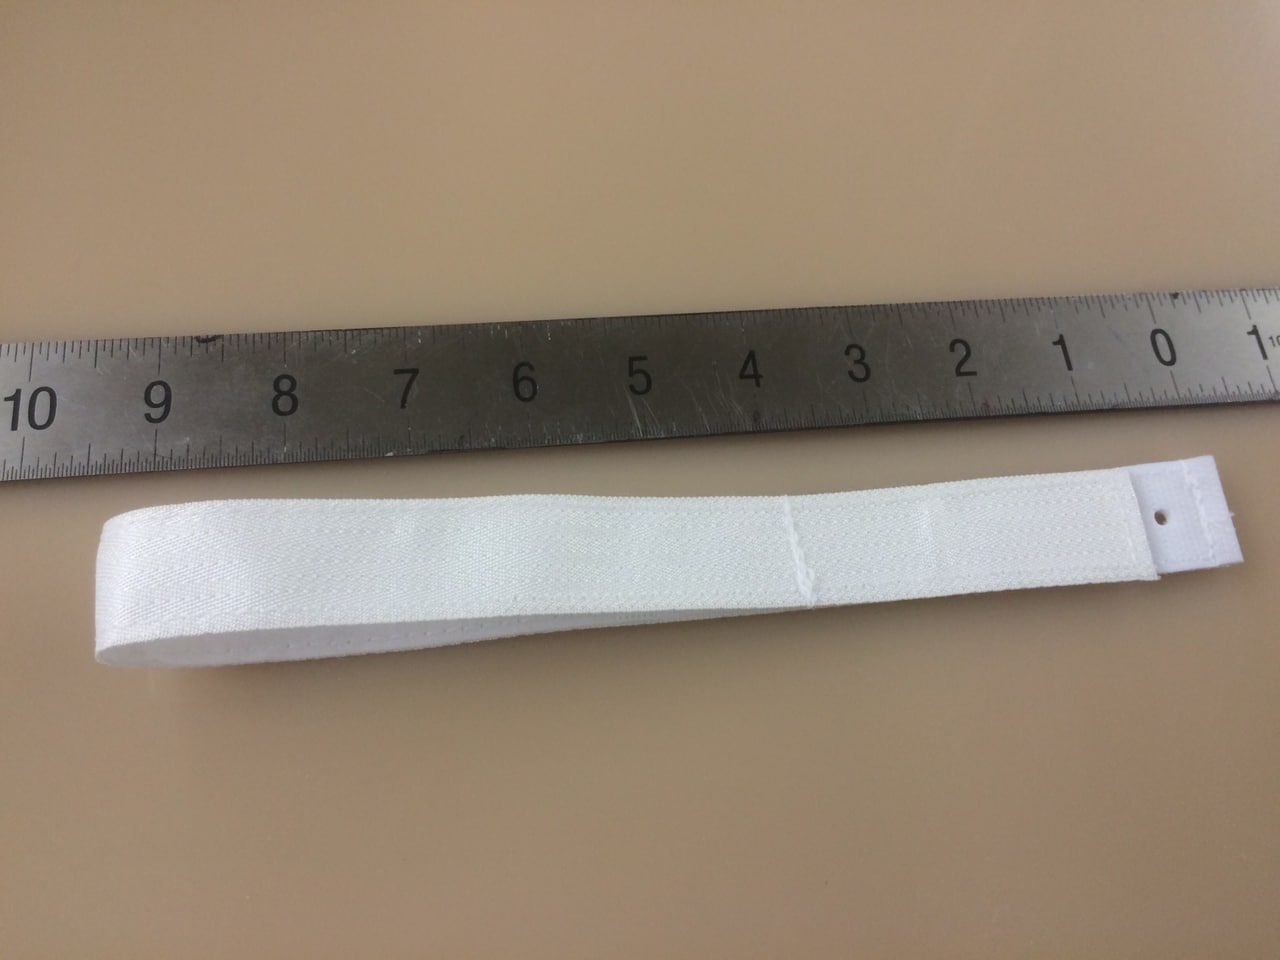 Replacement Strap - 20” (Extra Long) by 1.5" in Vinyl